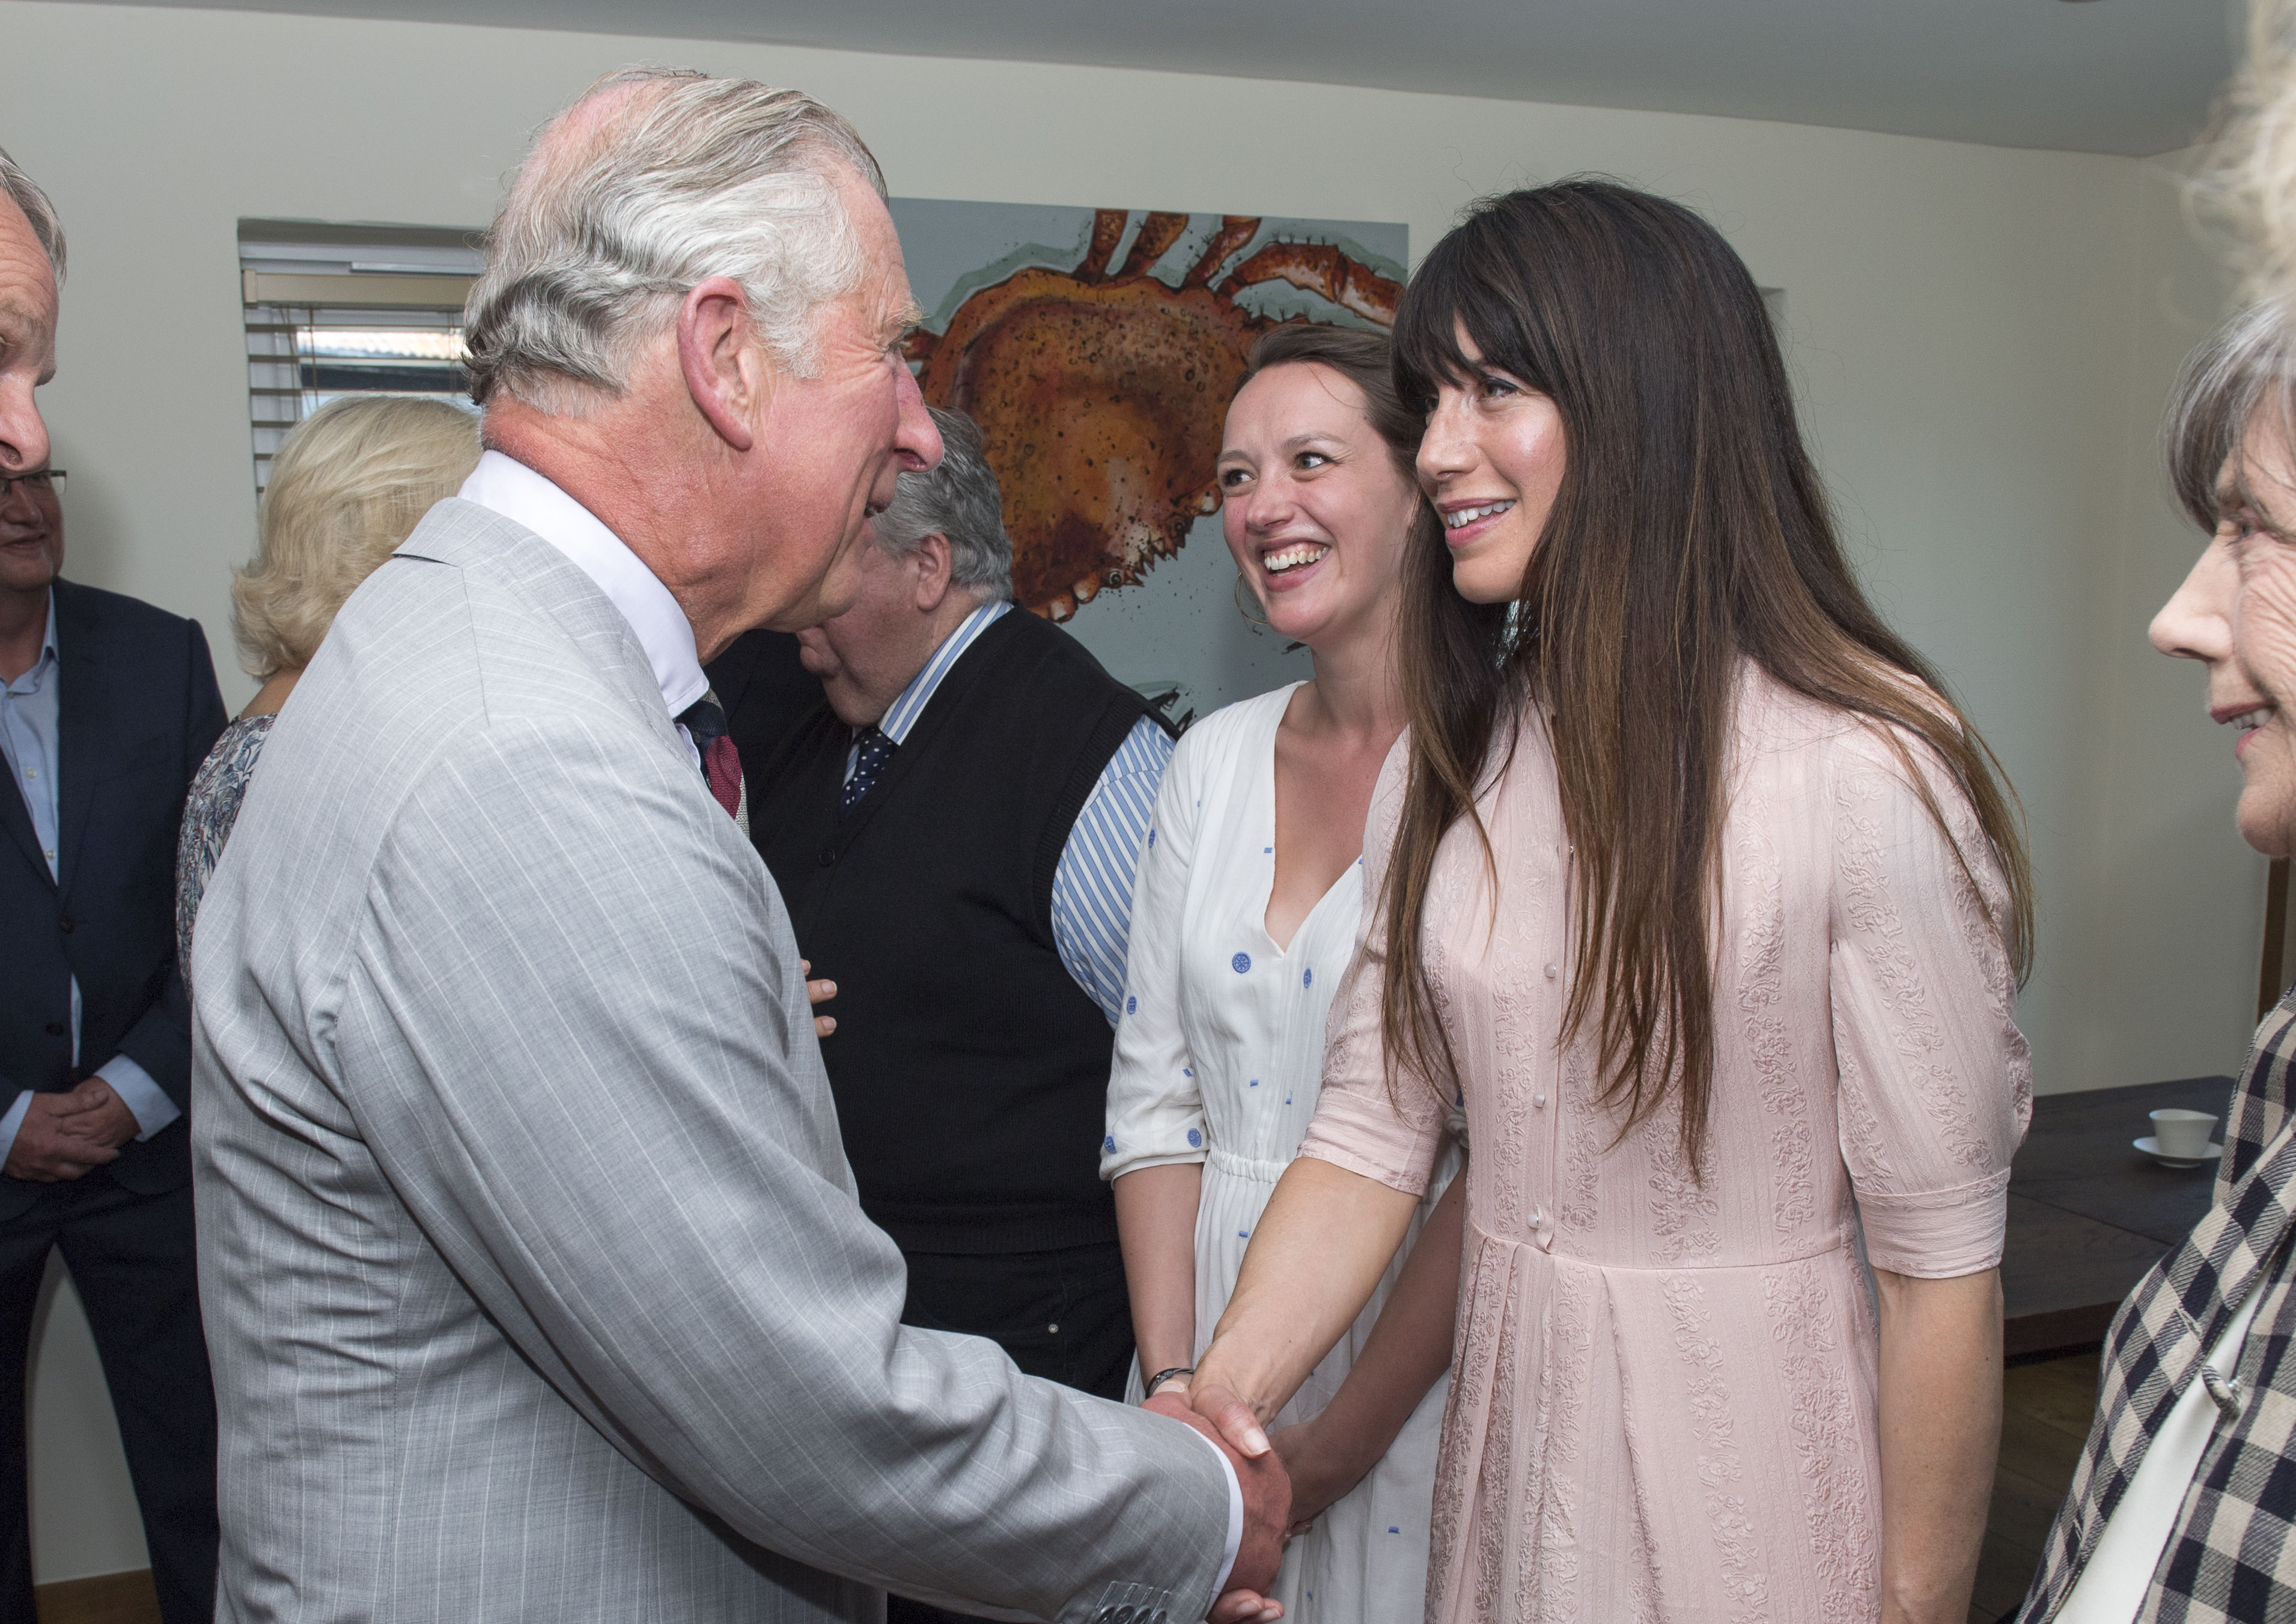 Caroline Catz (right) meeting Prince Charles in 2016